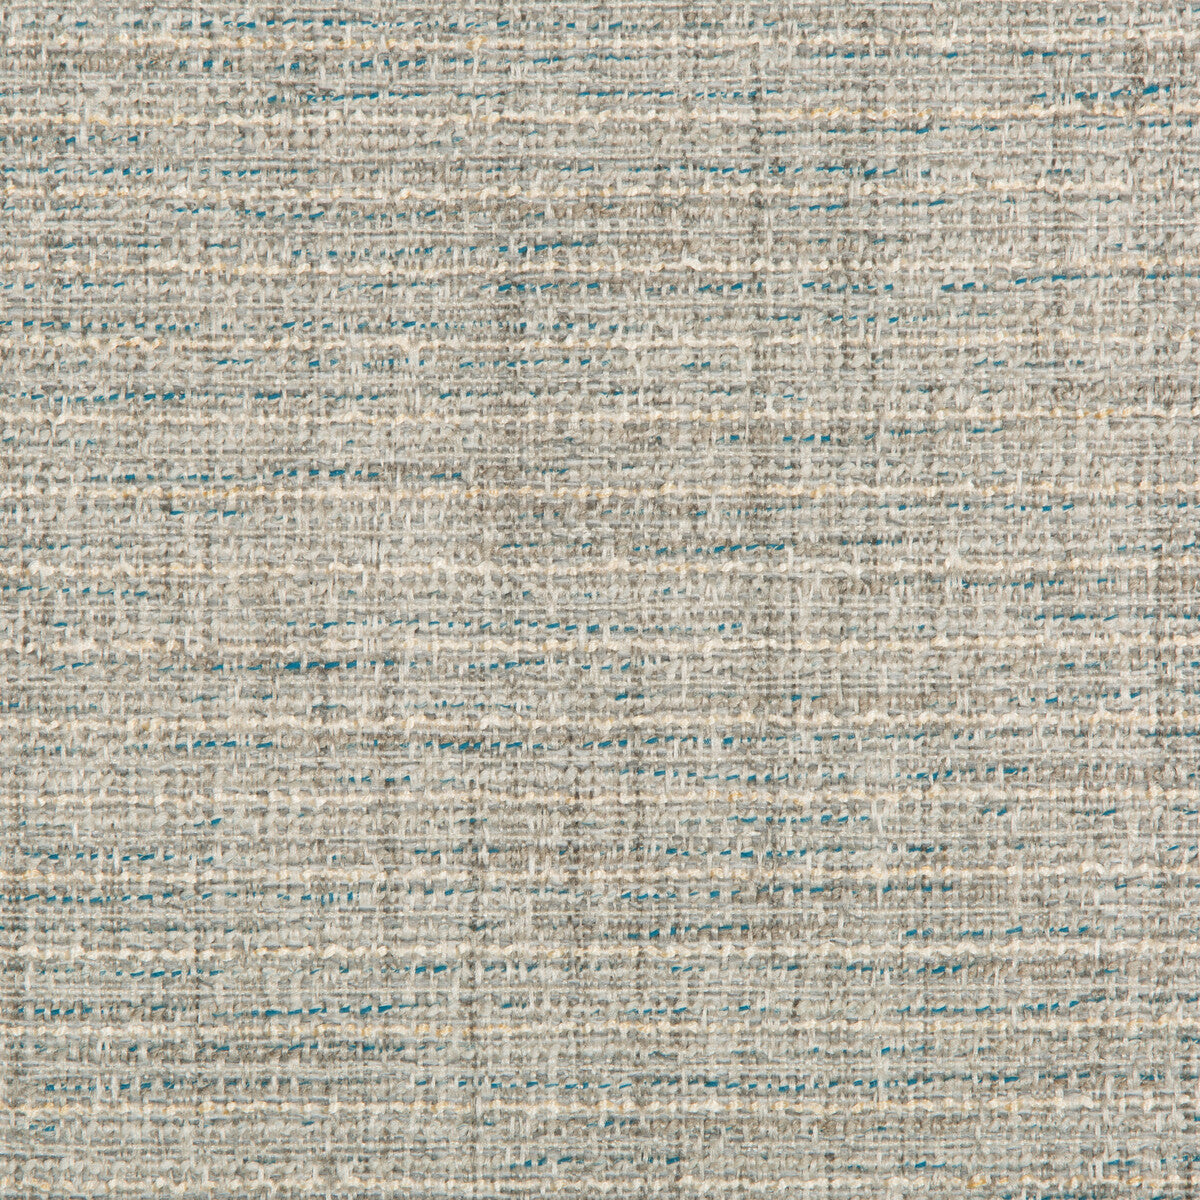 Kravet Smart fabric in 35396-511 color - pattern 35396.511.0 - by Kravet Smart in the Performance Crypton Home collection